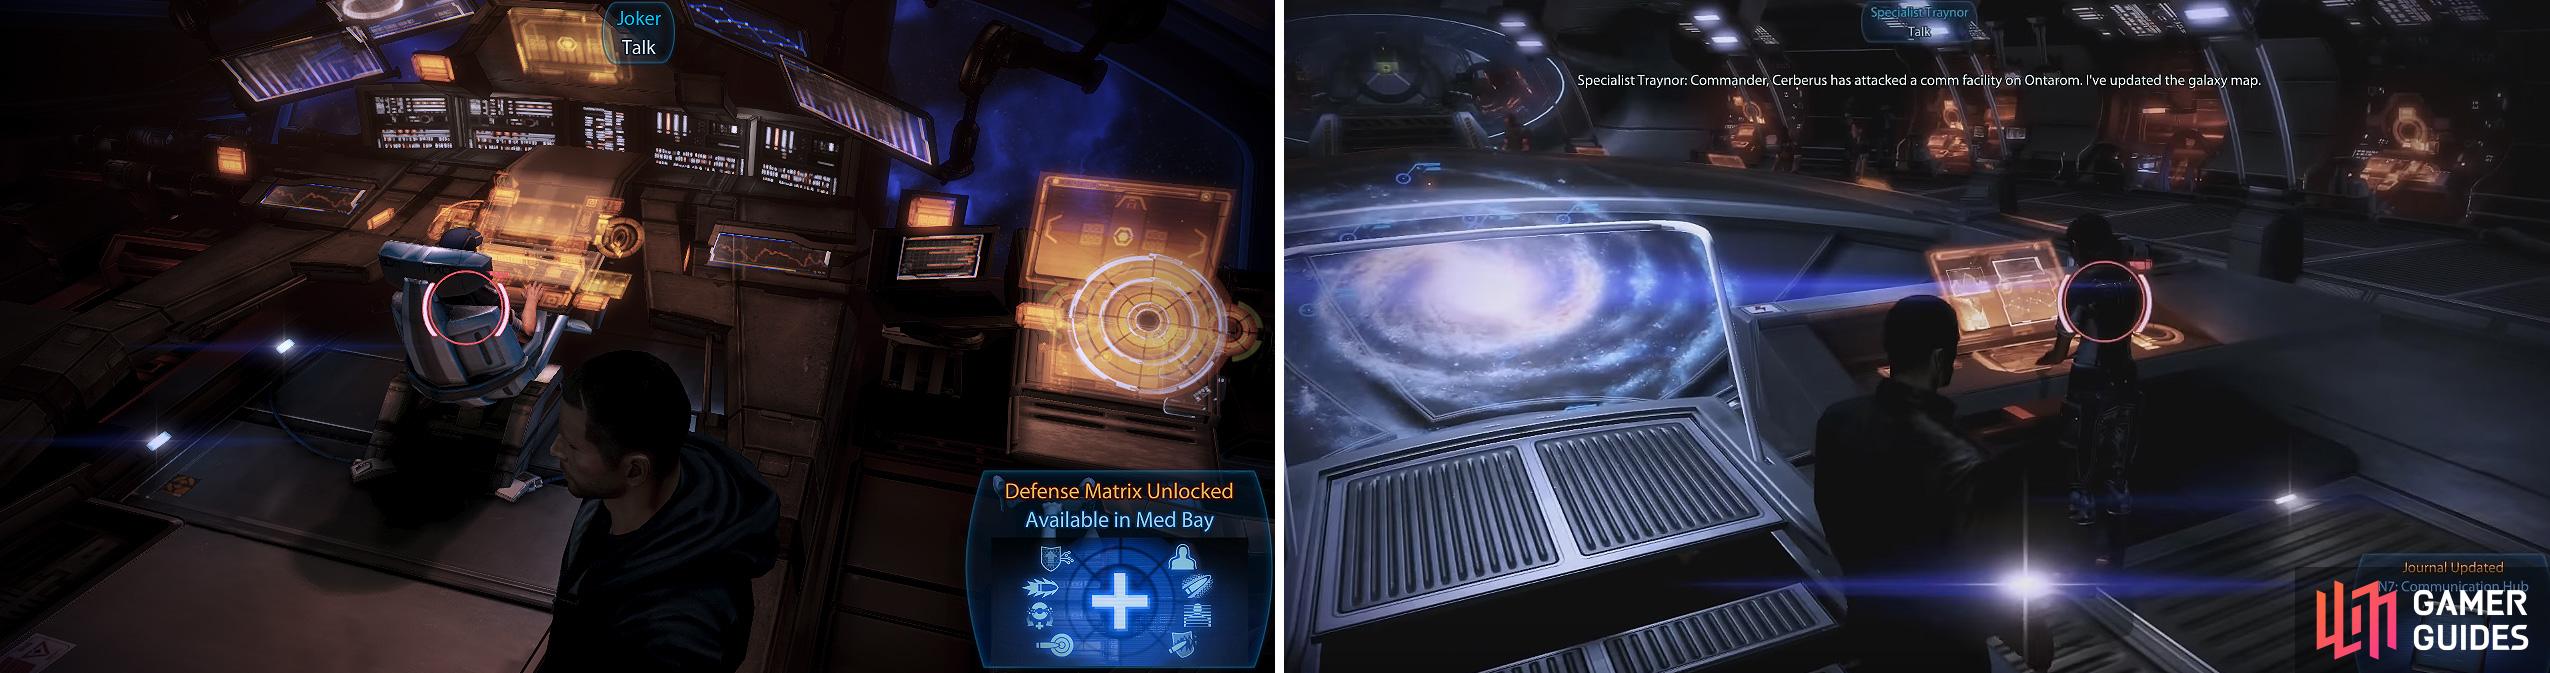 EDI's Defense Matrix skill (left) can be unlocked and you can also visit Traynor for another N7 mission (right).